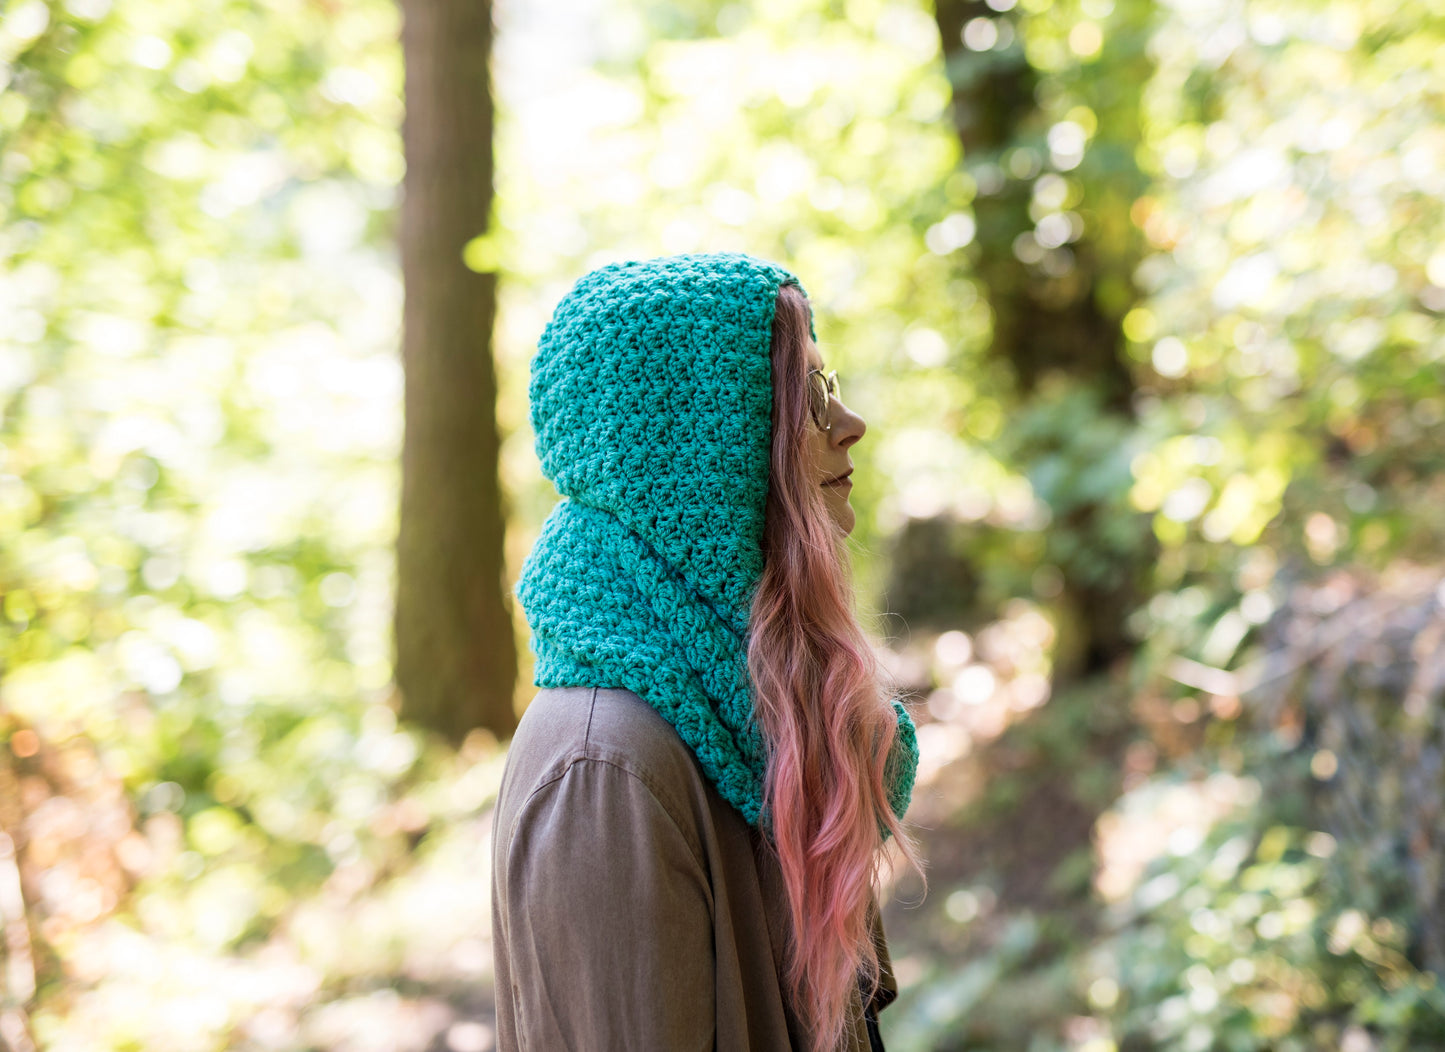 Crochet Pattern: The Magpie Hooded Scarf